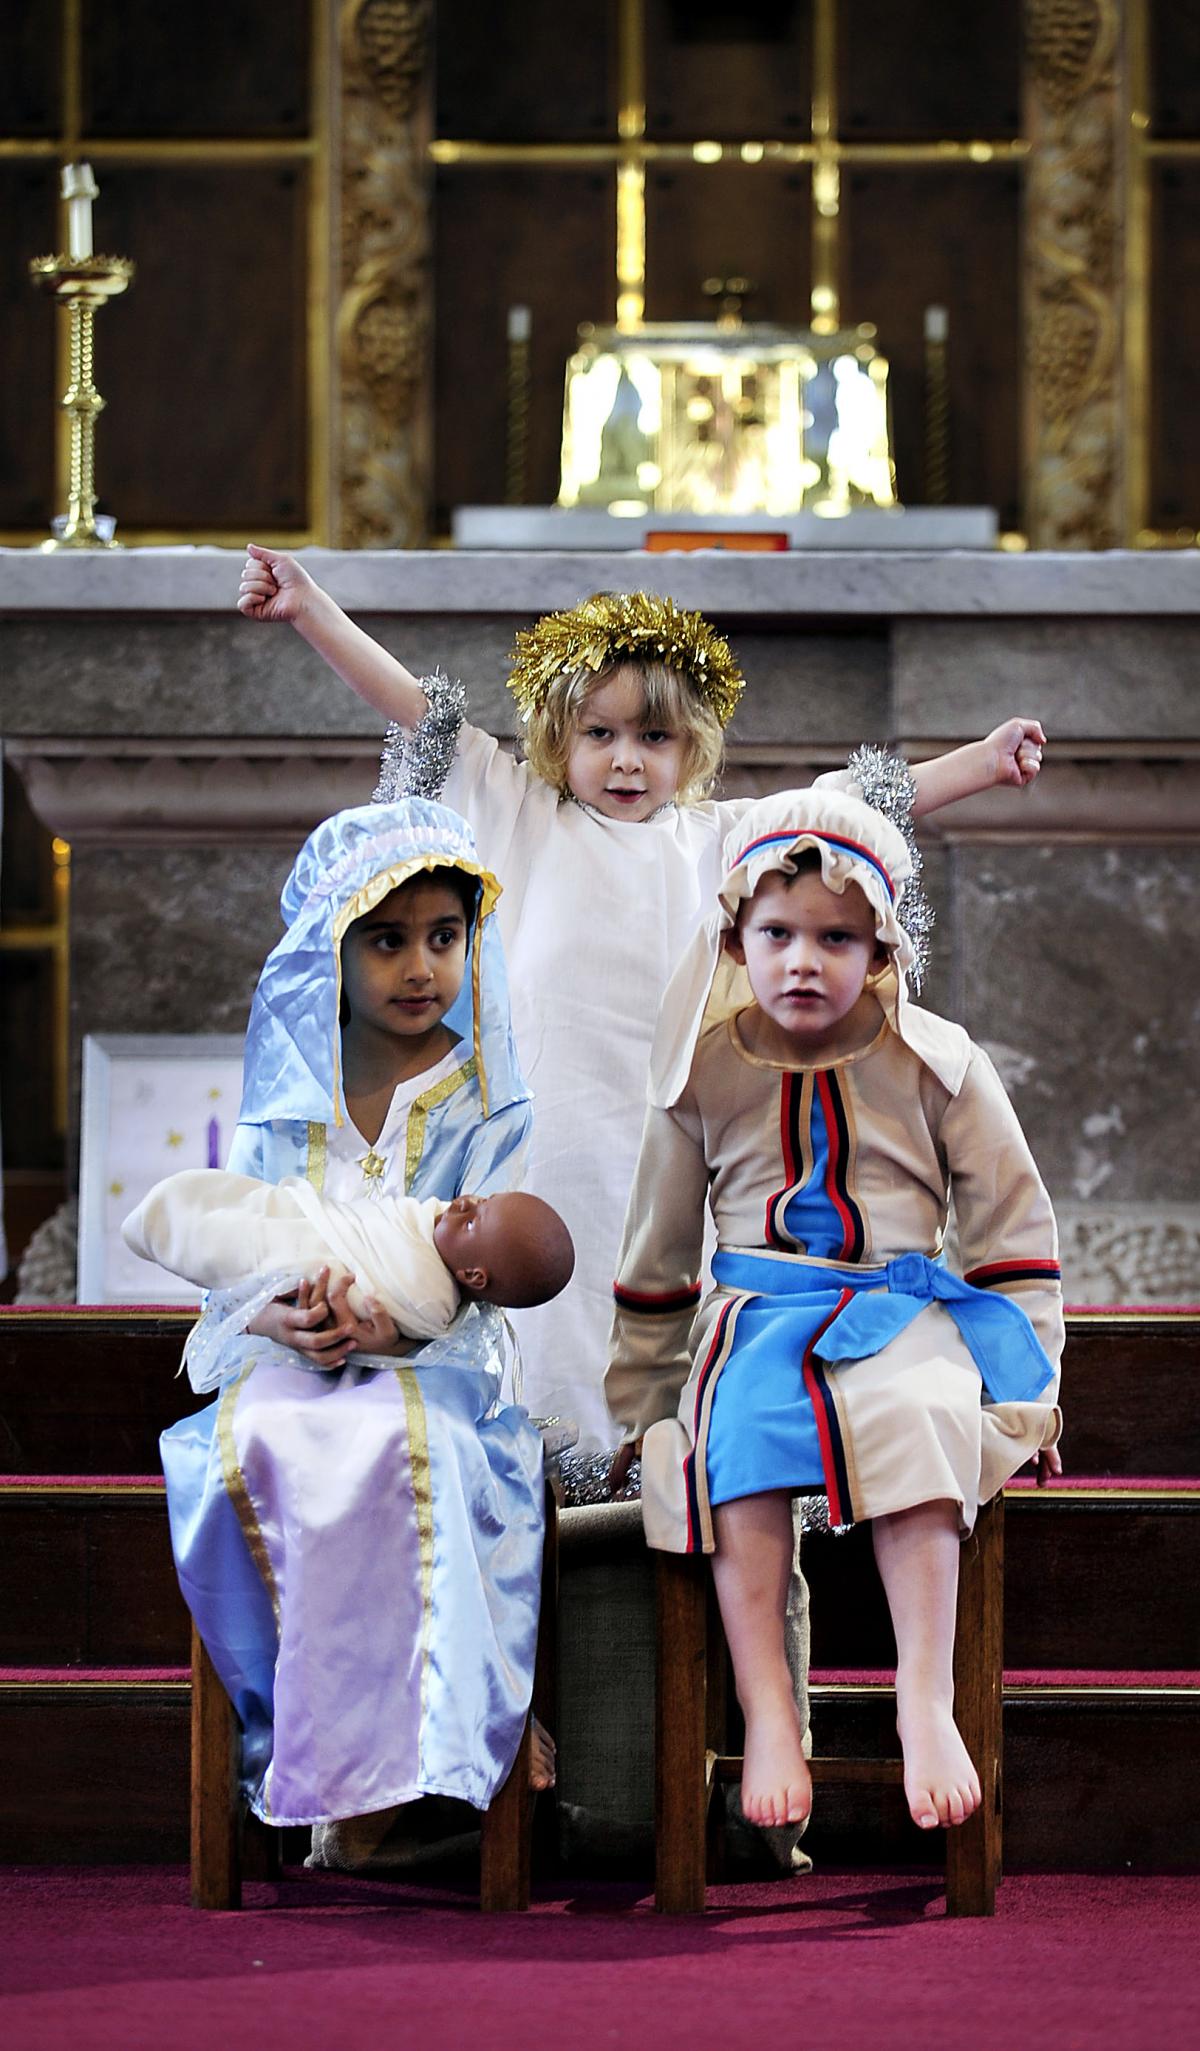 Taking part in St Clare's Catholic Primary School Nativity are, from the left, Alyssa Koshal-Mahmood, Dante Kelly and Daniel Liddemore